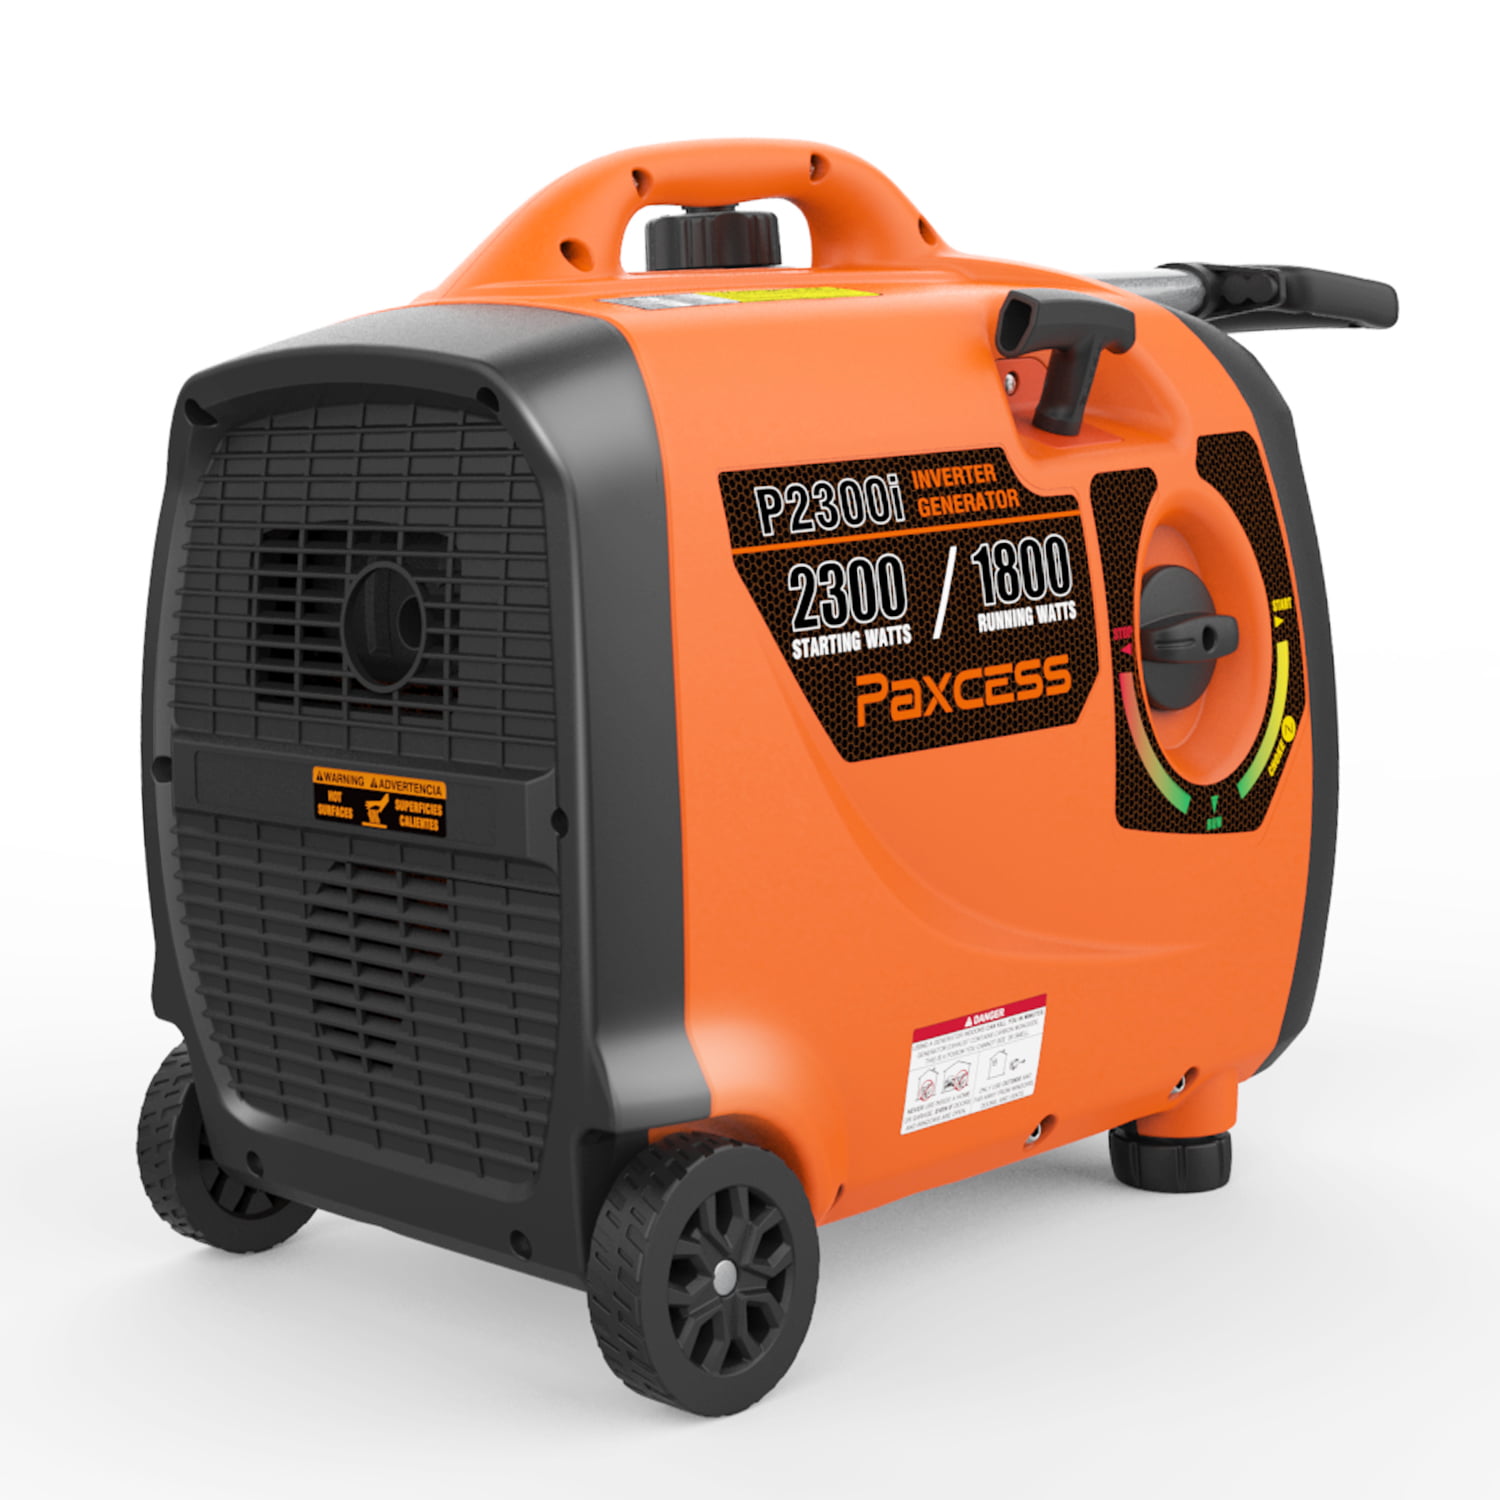 PAXCESS Super Quiet 2300 Watts Portable Inverter Generator Gas Powered with Wheels and Handle LCD Display Screen/Eco-Mode/Parallel Ready/CARB Complaint 2300W 